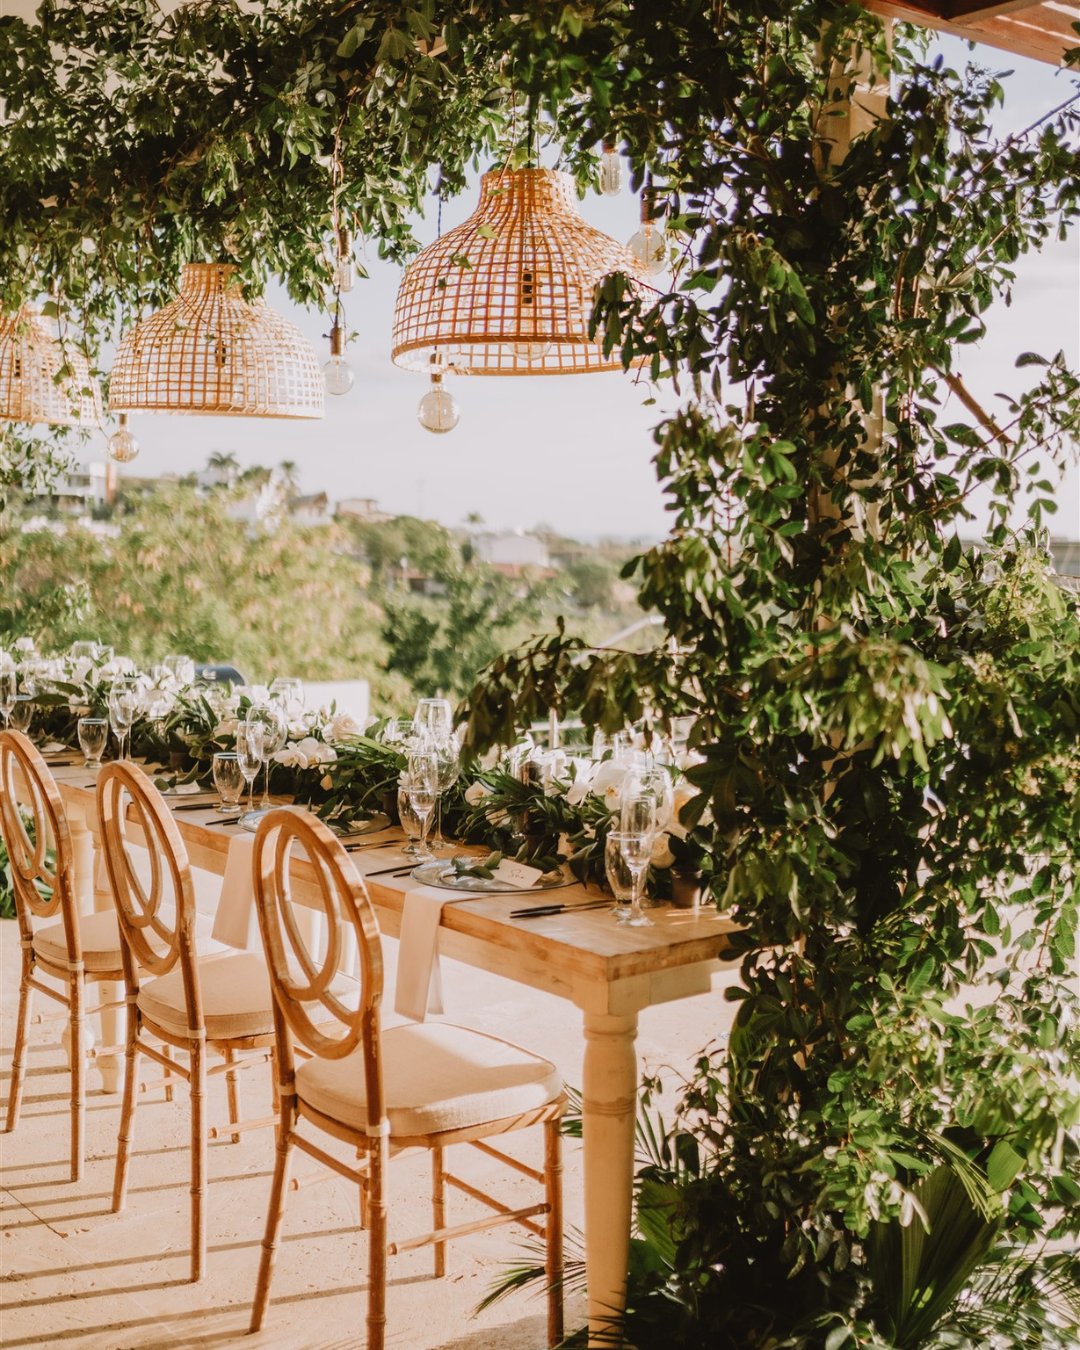 An outdoor dining table set for an event with elegant floral arrangements and wooden chairs overlooks a scenic ocean view at sunset, under hanging wicker lamps and decorative greenery.